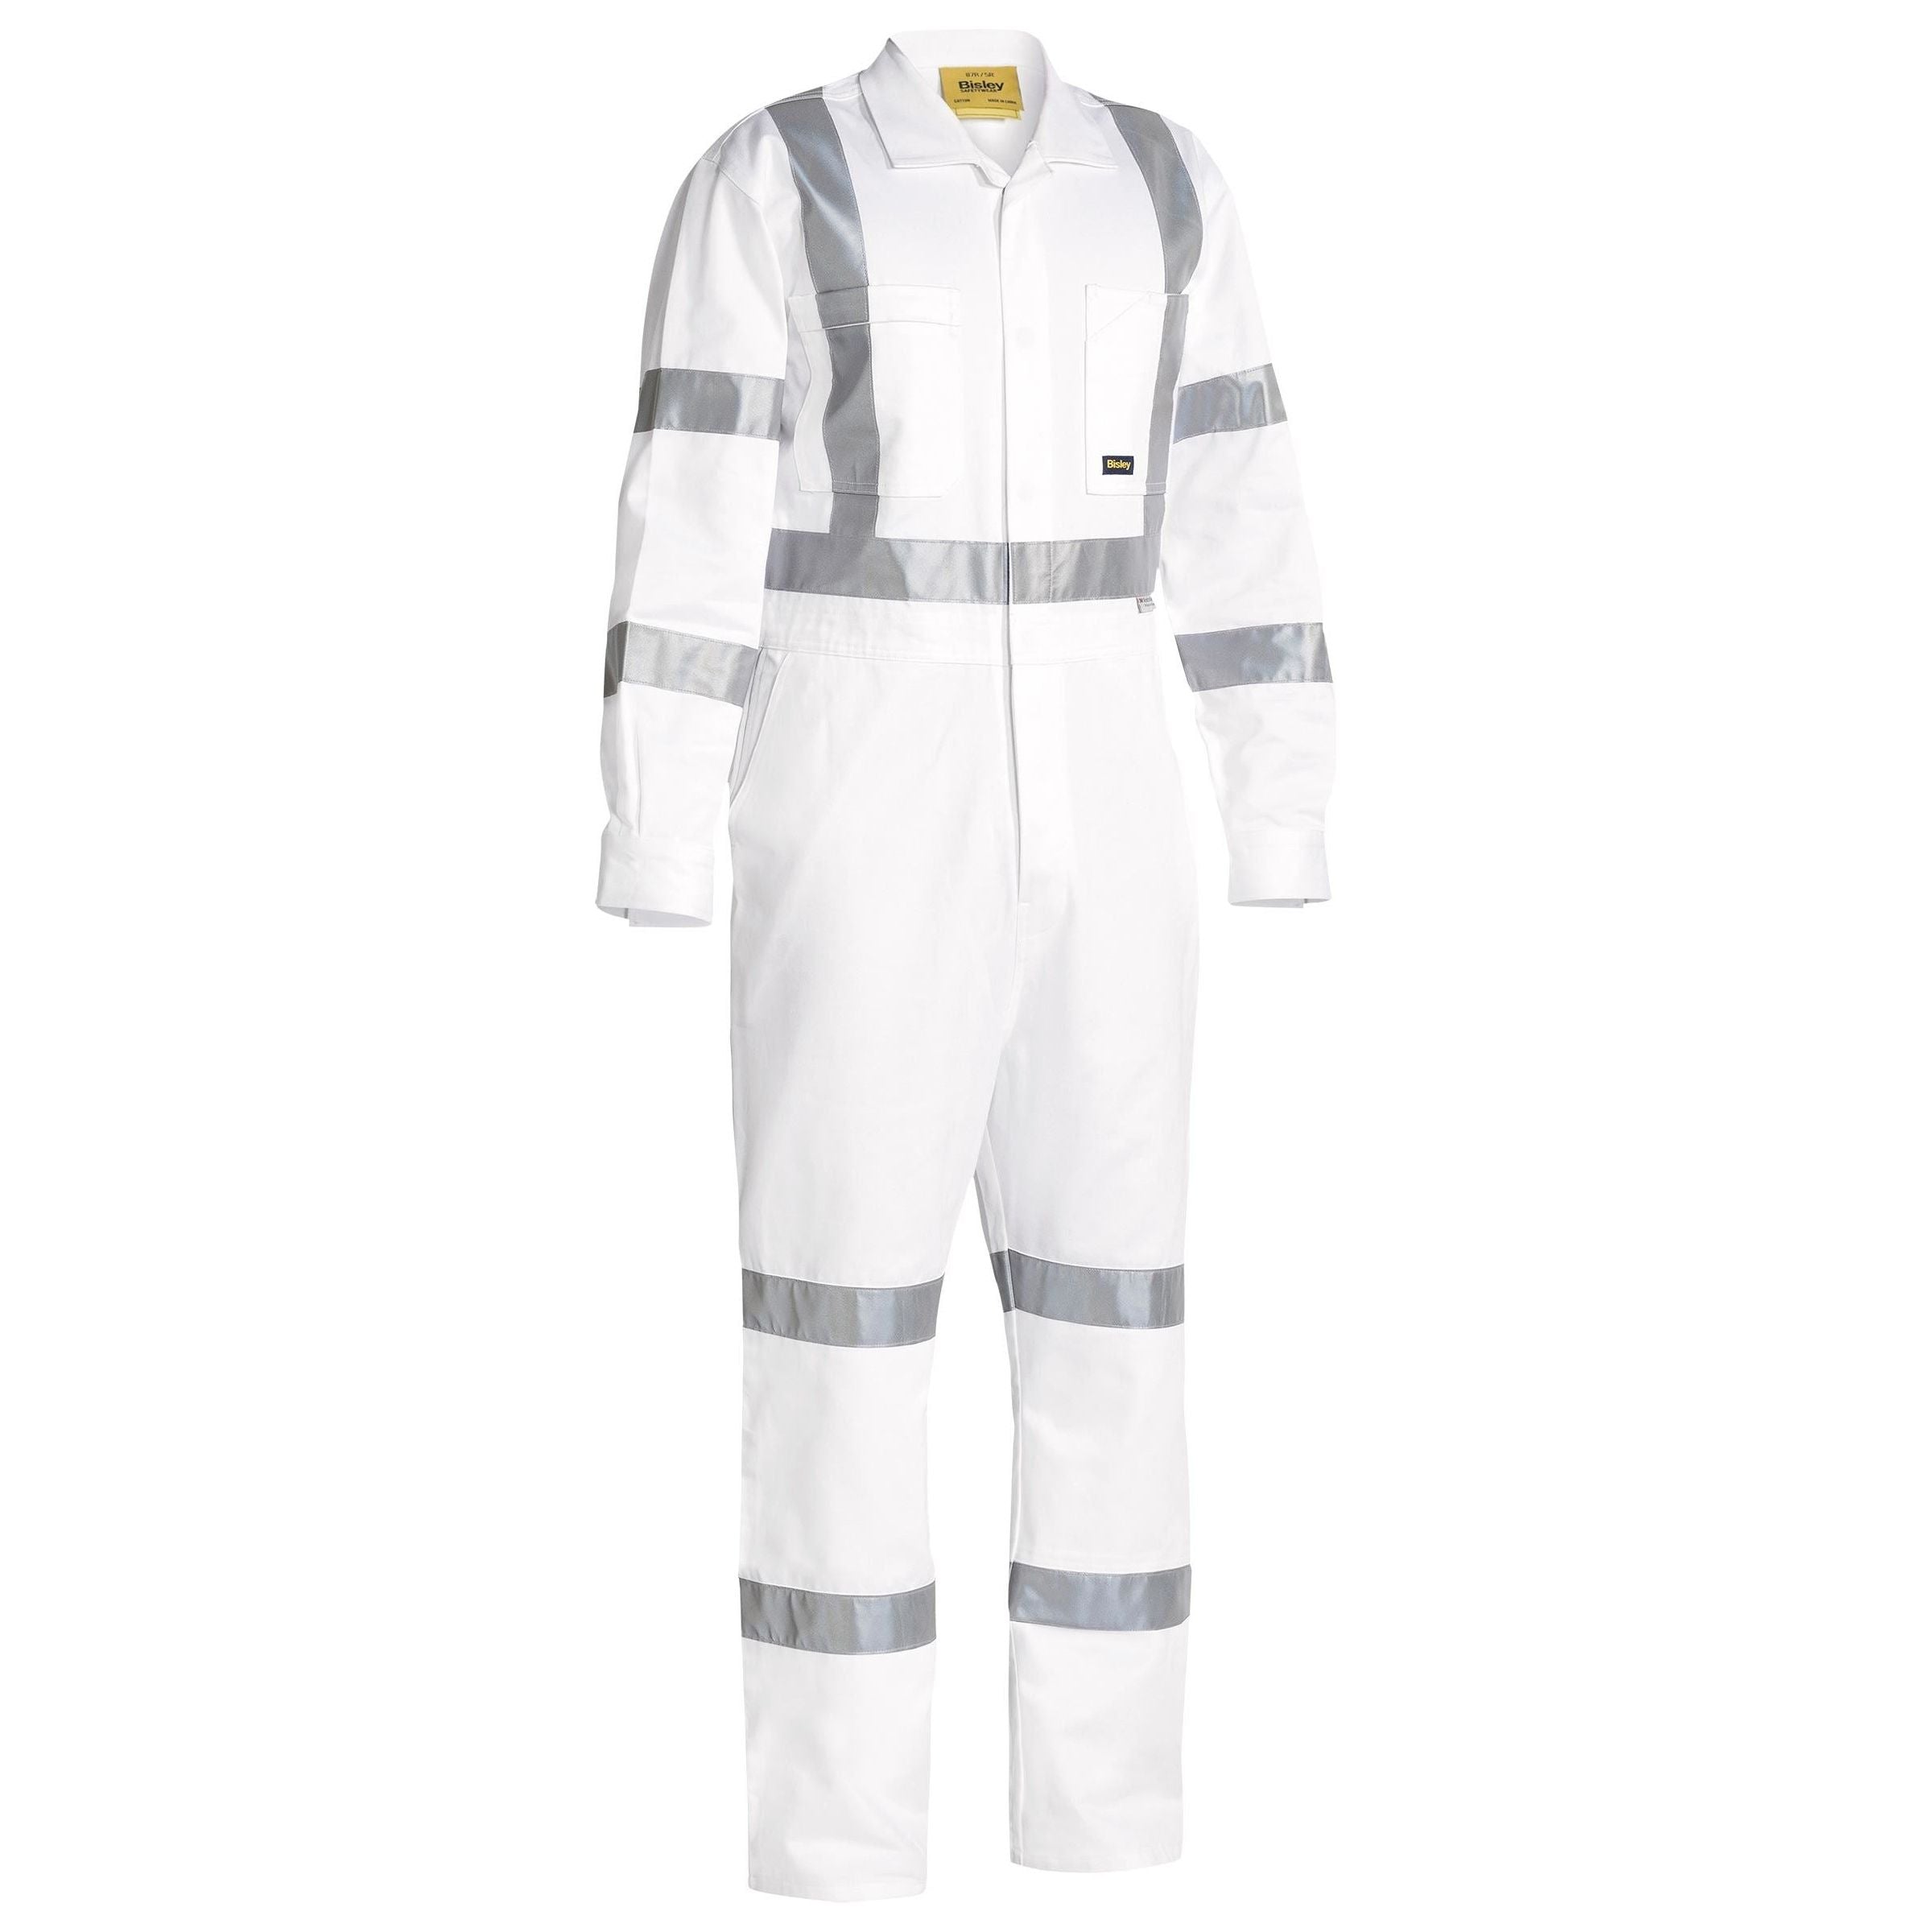 3M Taped White Drill Coverall - BC6806T